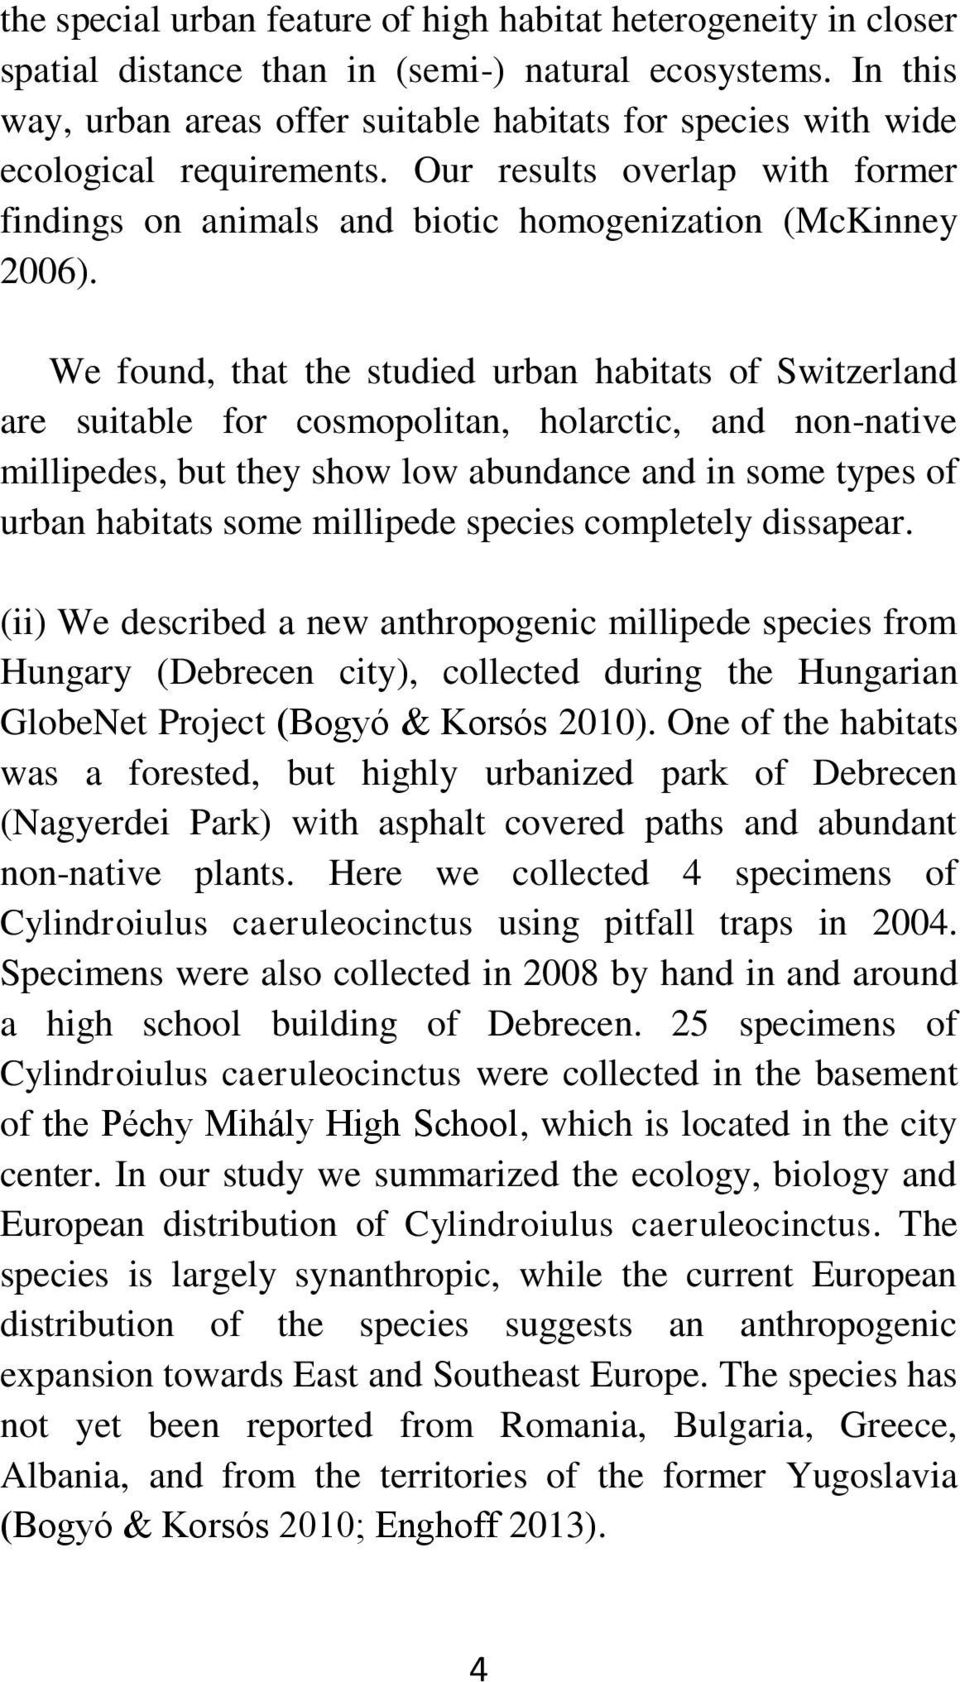 We found, that the studied urban habitats of Switzerland are suitable for cosmopolitan, holarctic, and non-native millipedes, but they show low abundance and in some types of urban habitats some